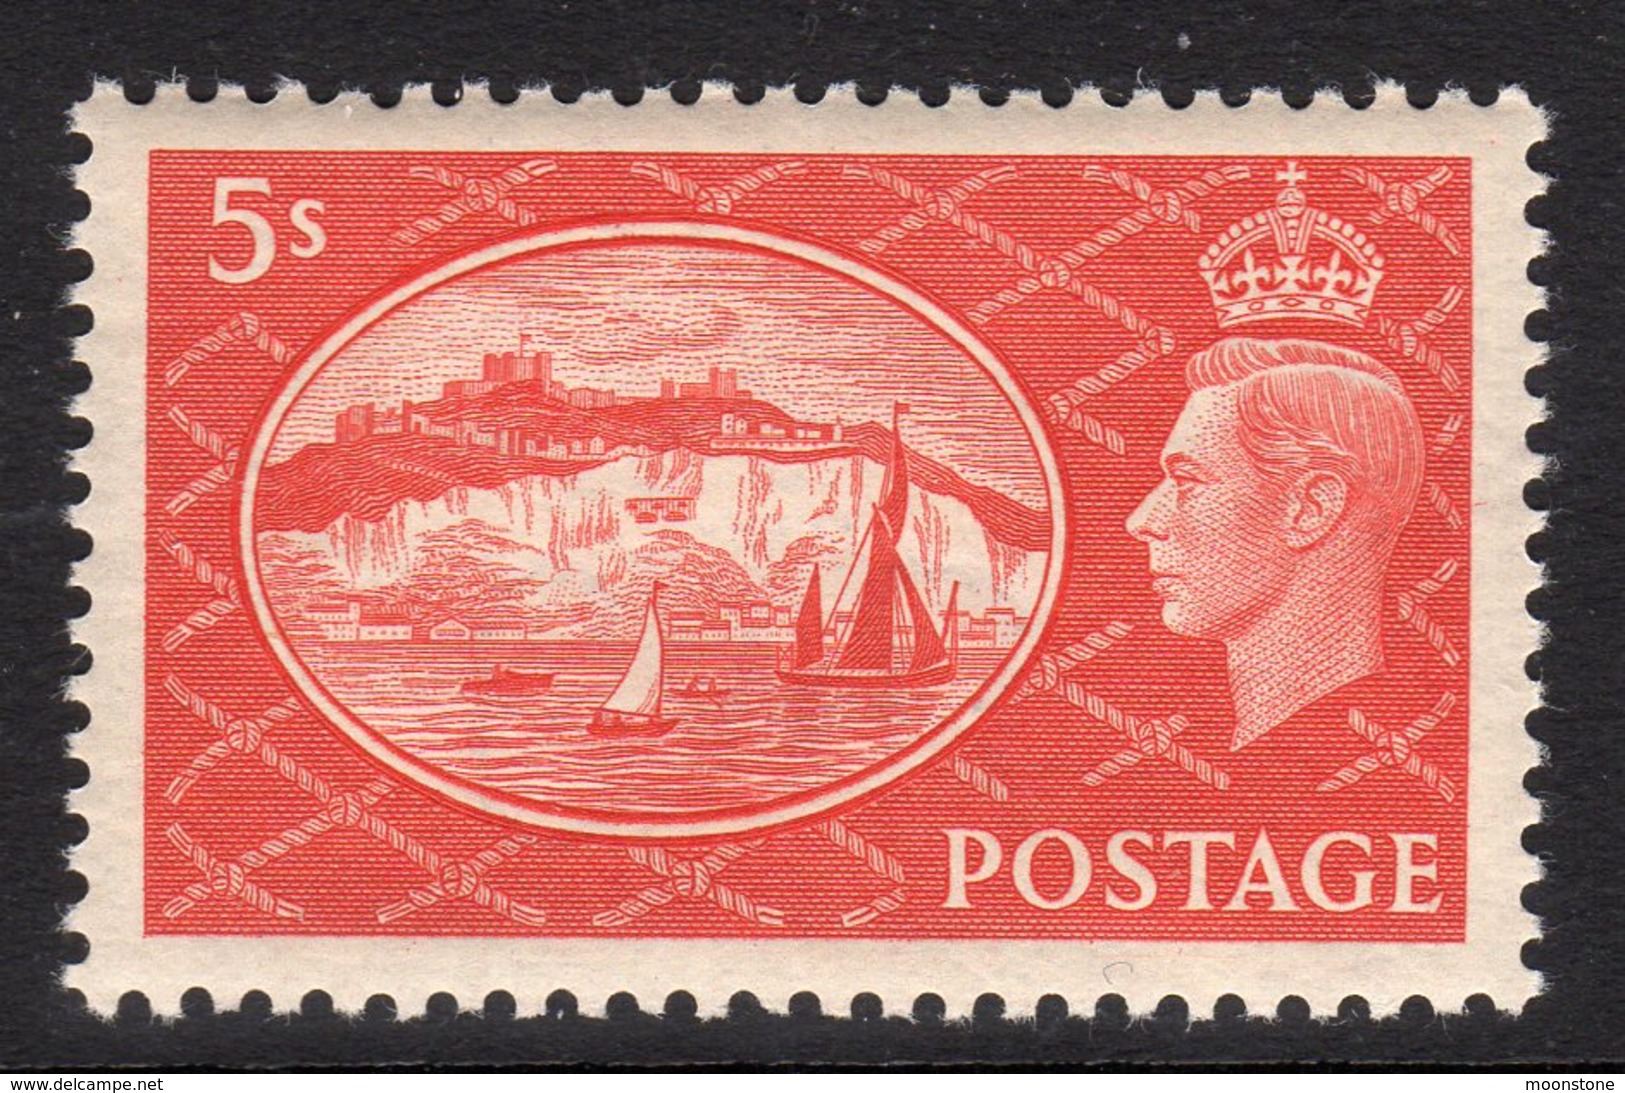 Great Britain GB George VI 1951 'Festival' 5/- Definitive, Hinged Mint, SG 510 - Unused Stamps